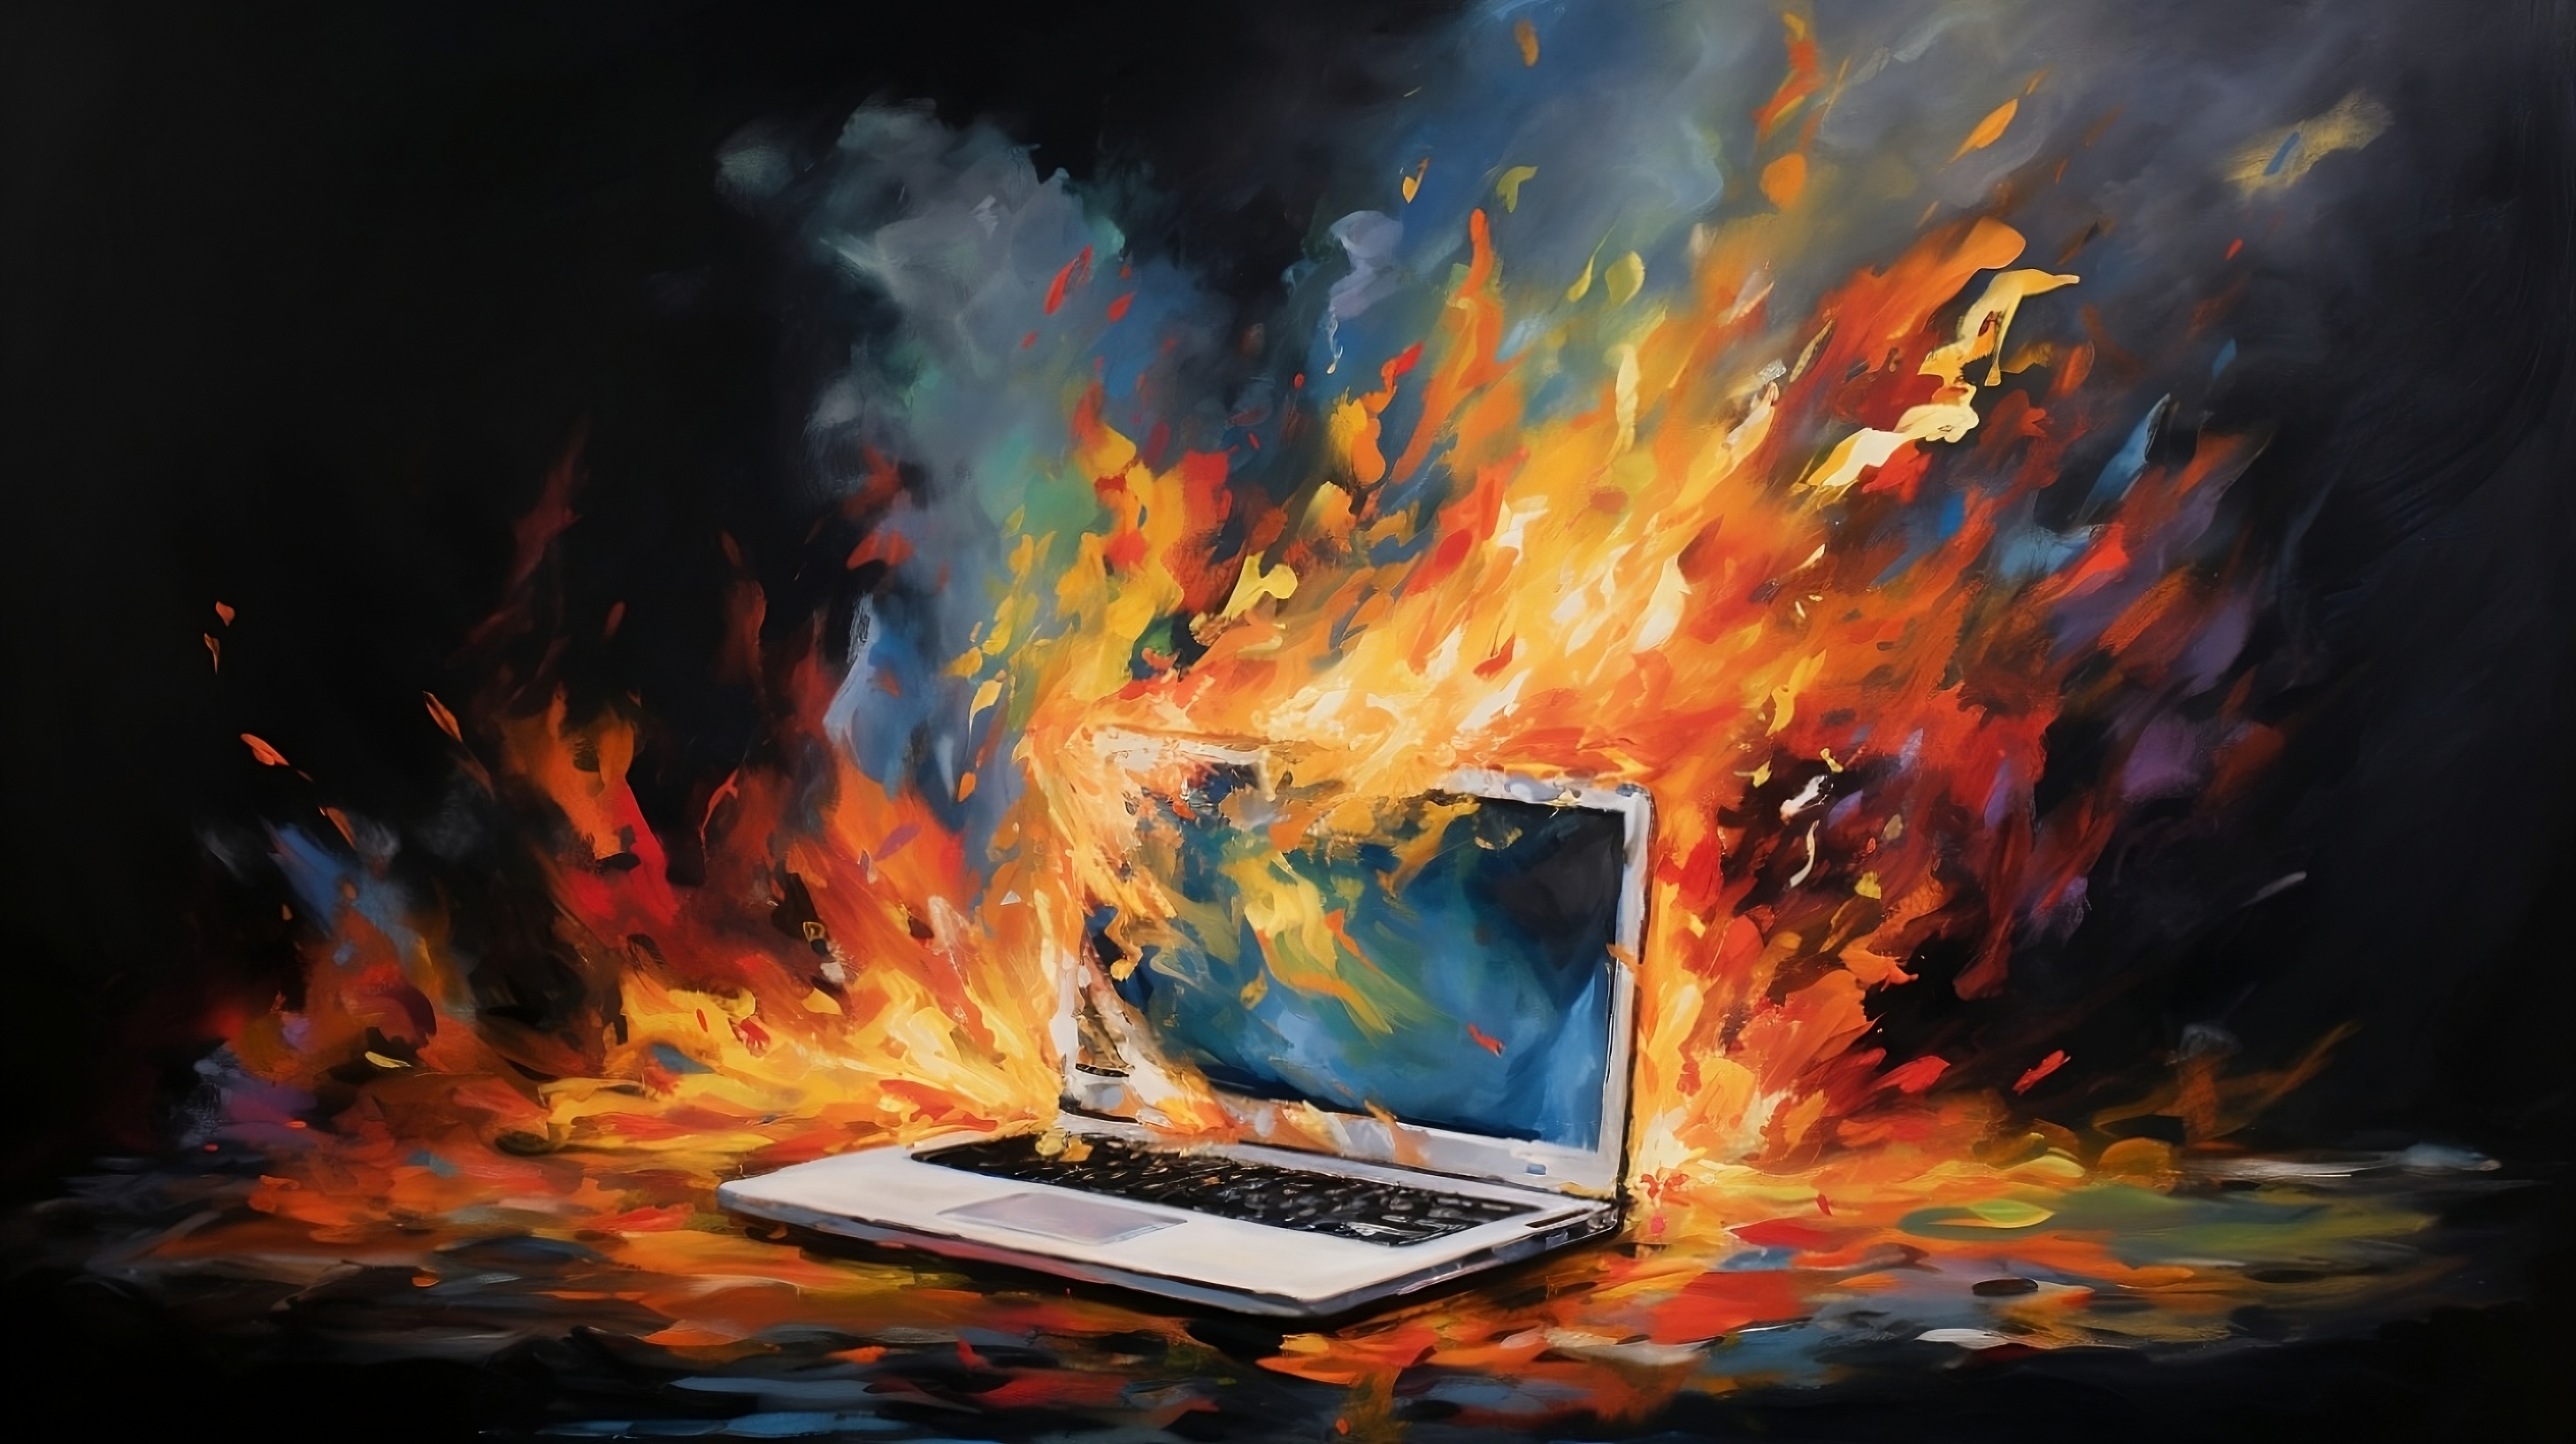 Google on a laptop set on fire, depicted as an abstract painting.